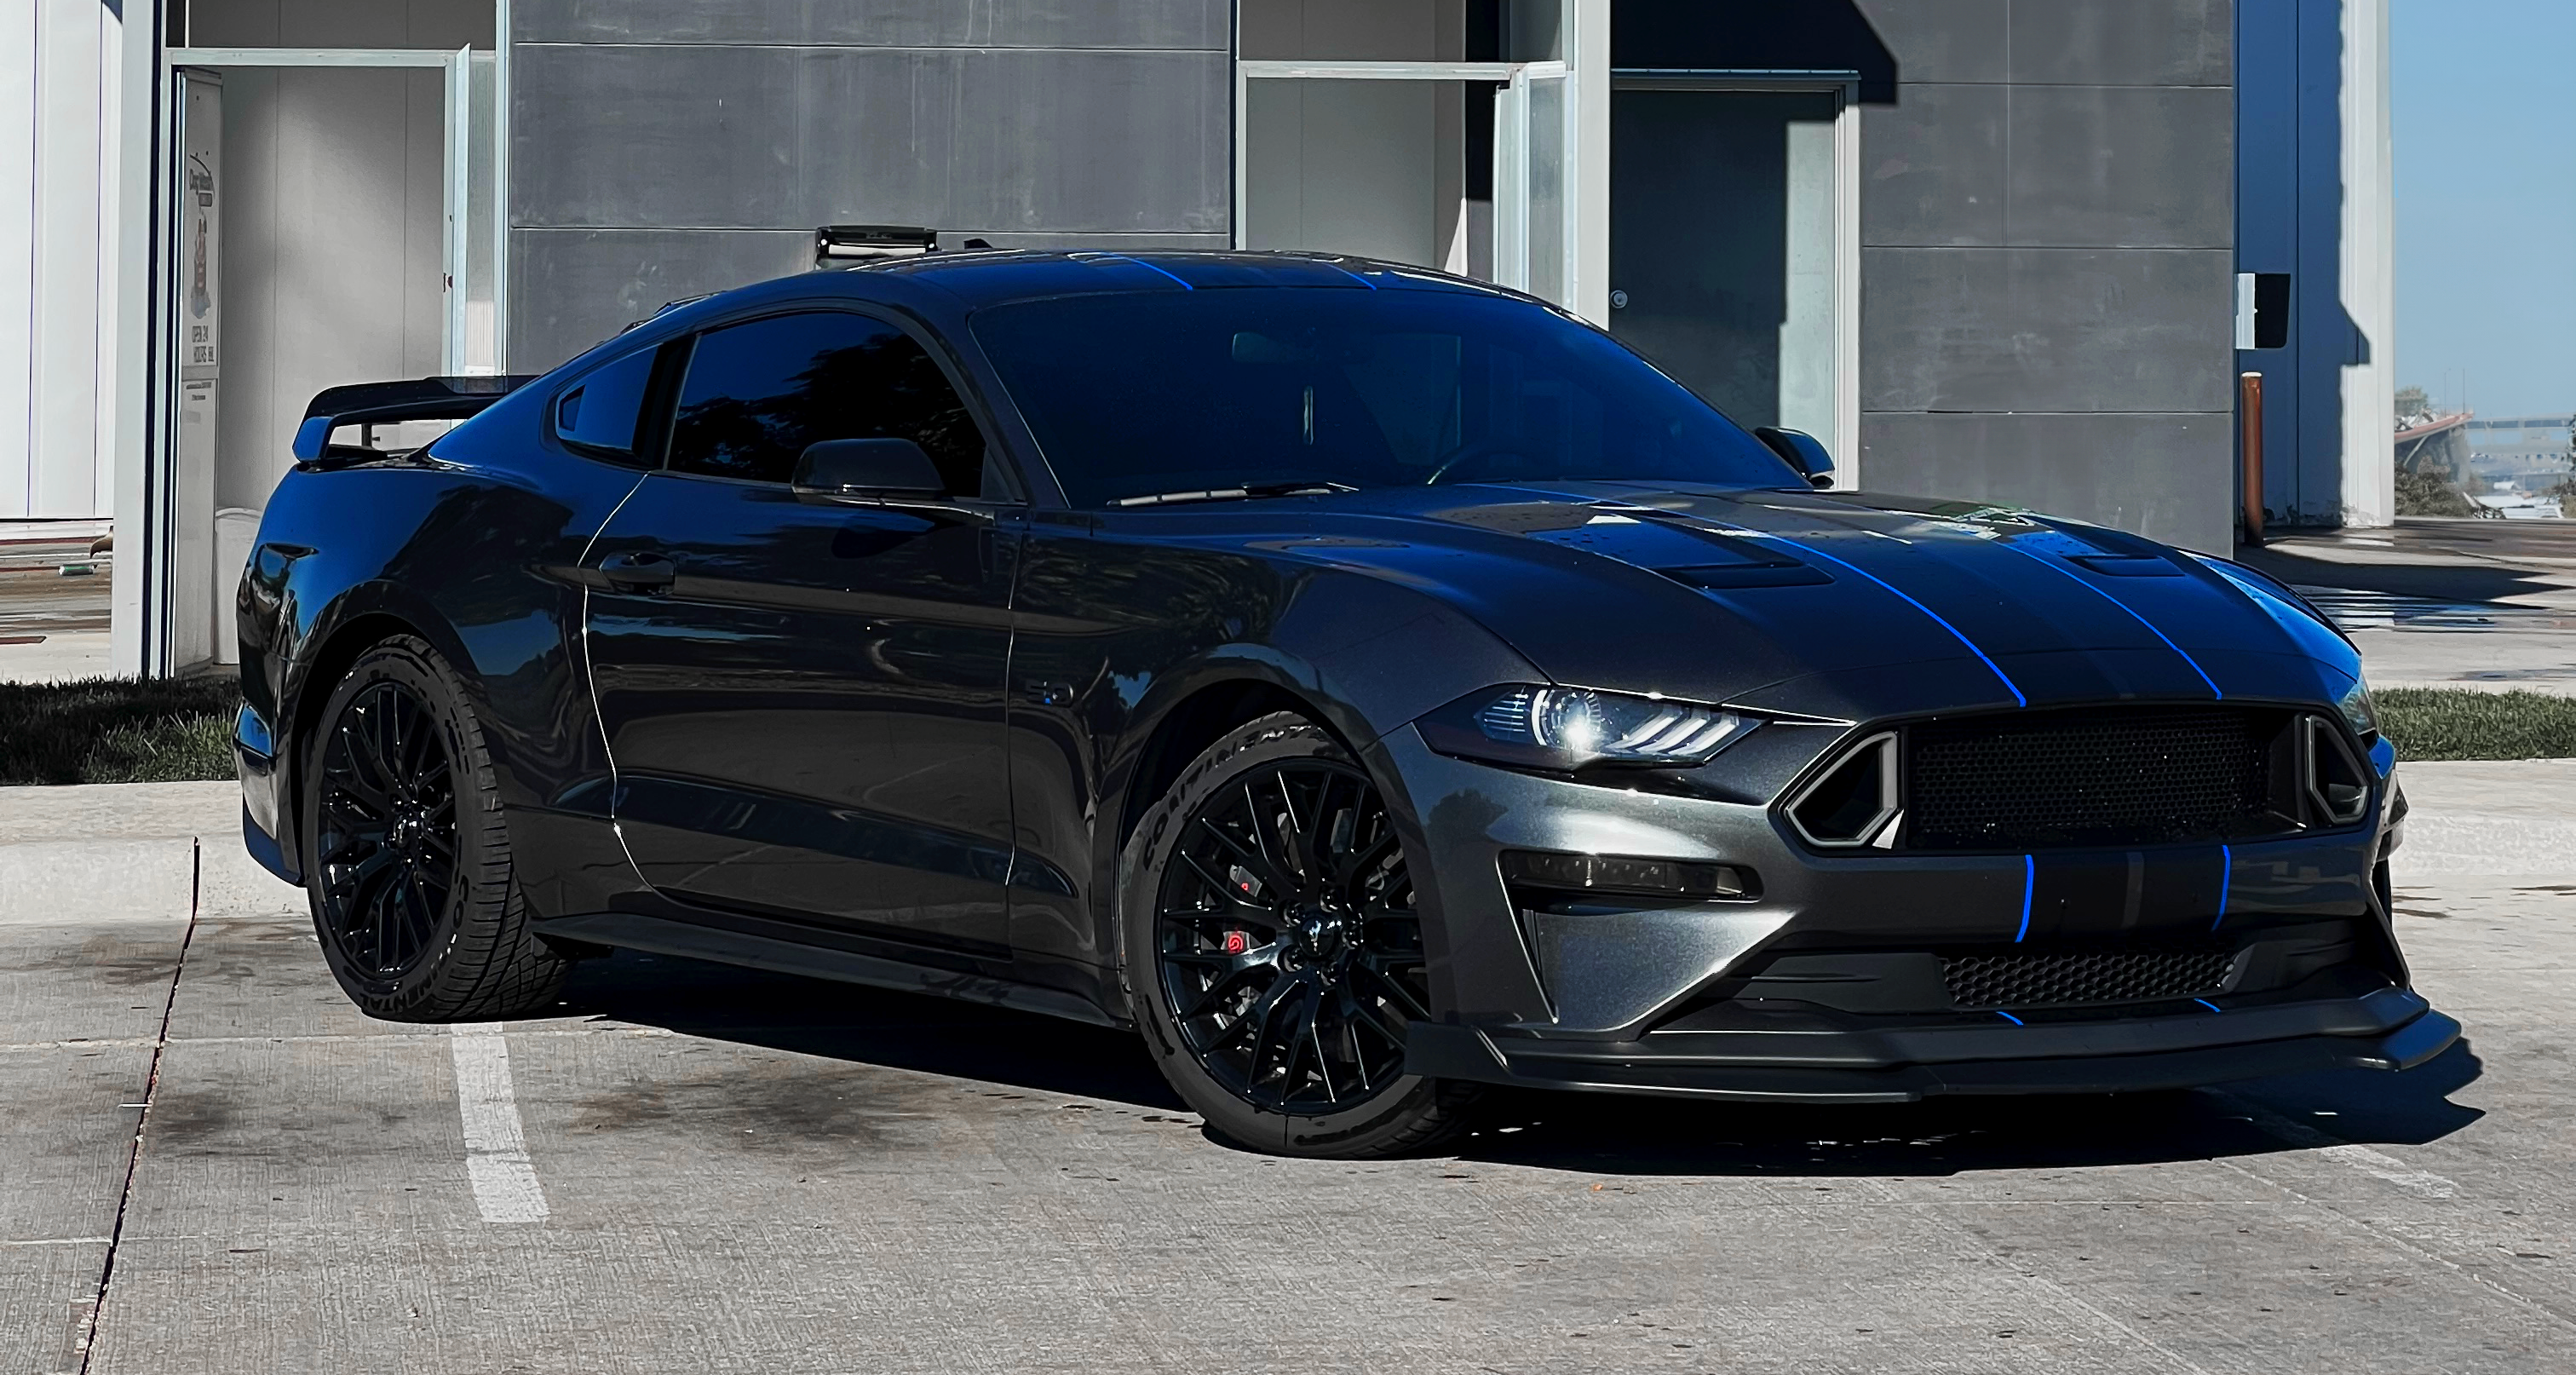 Ford Mustang GT with carbon fiber mirror covers, interior trim, and S650 Style RGB Taillights.